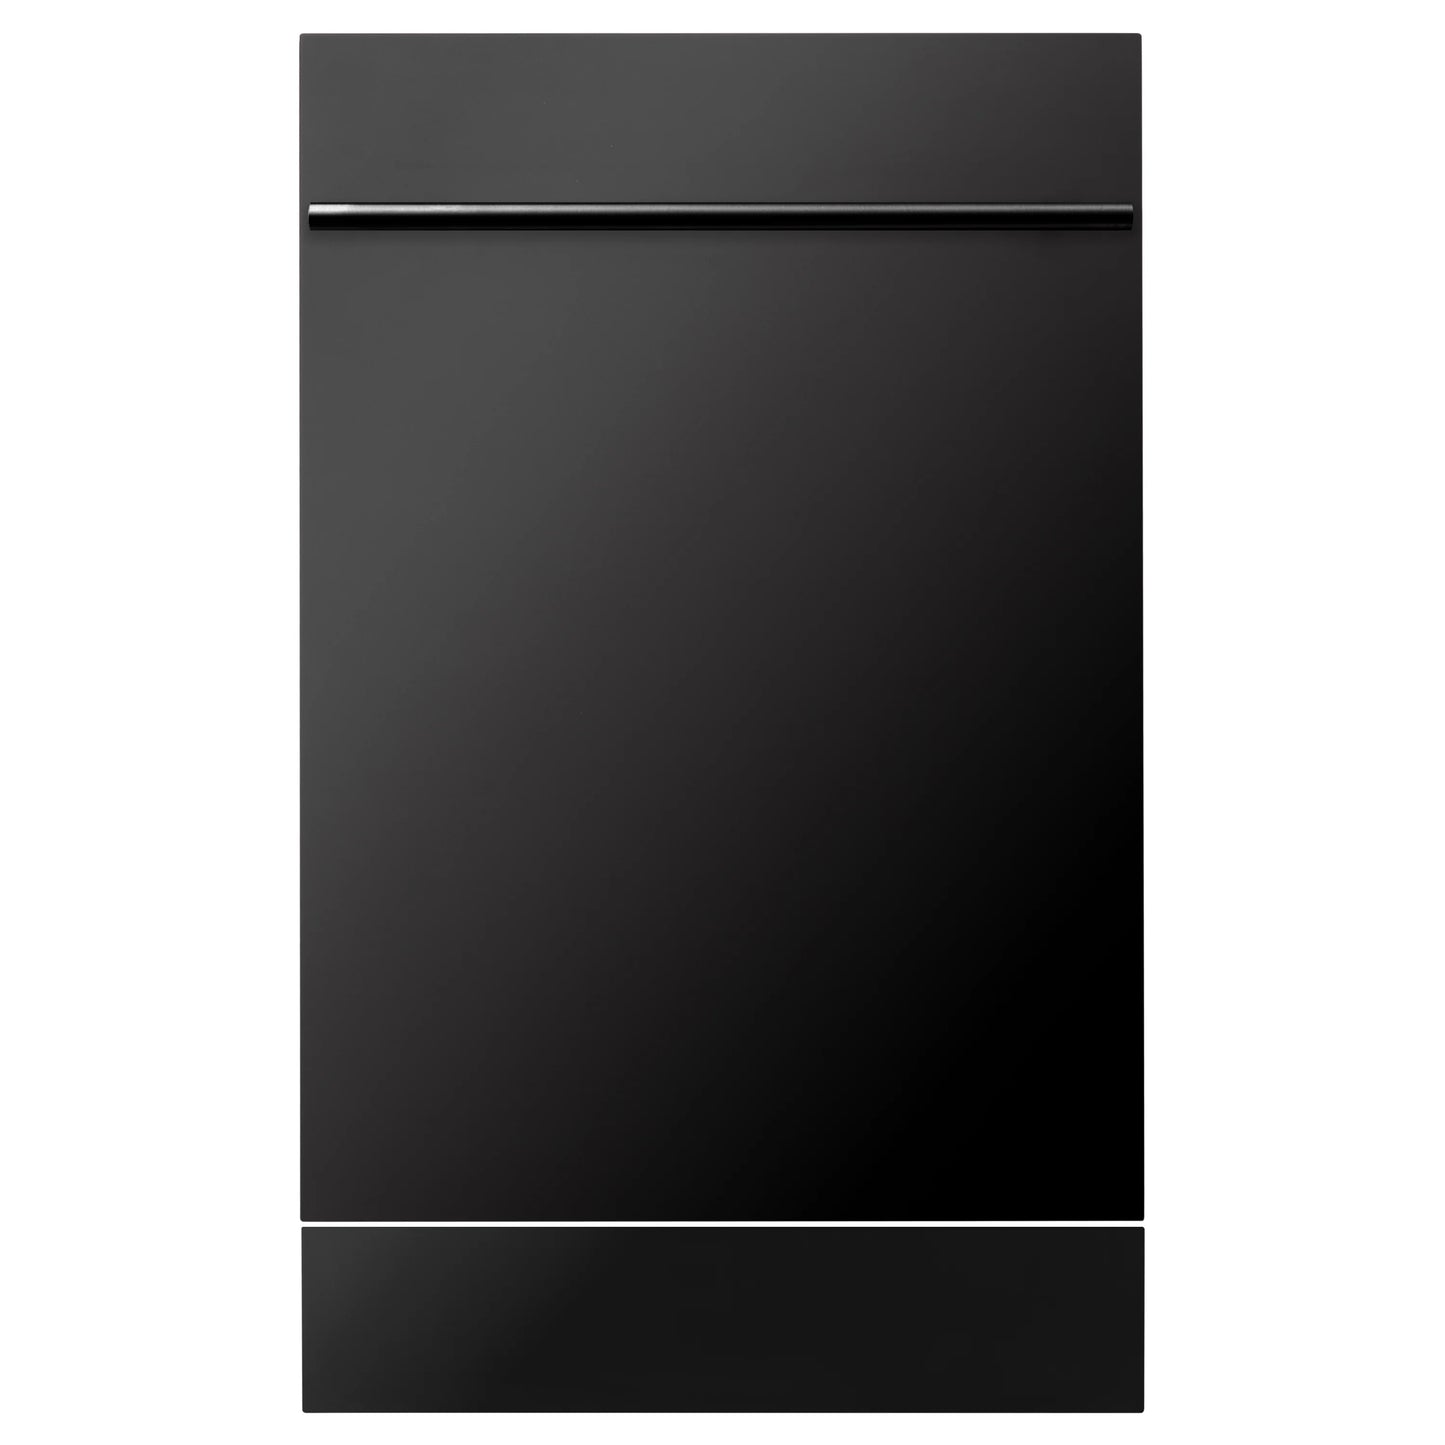 ZLINE 18 in. Top Control Dishwasher in Black Stainless Steel with Modern Style Handle (DW-BS-H-18)